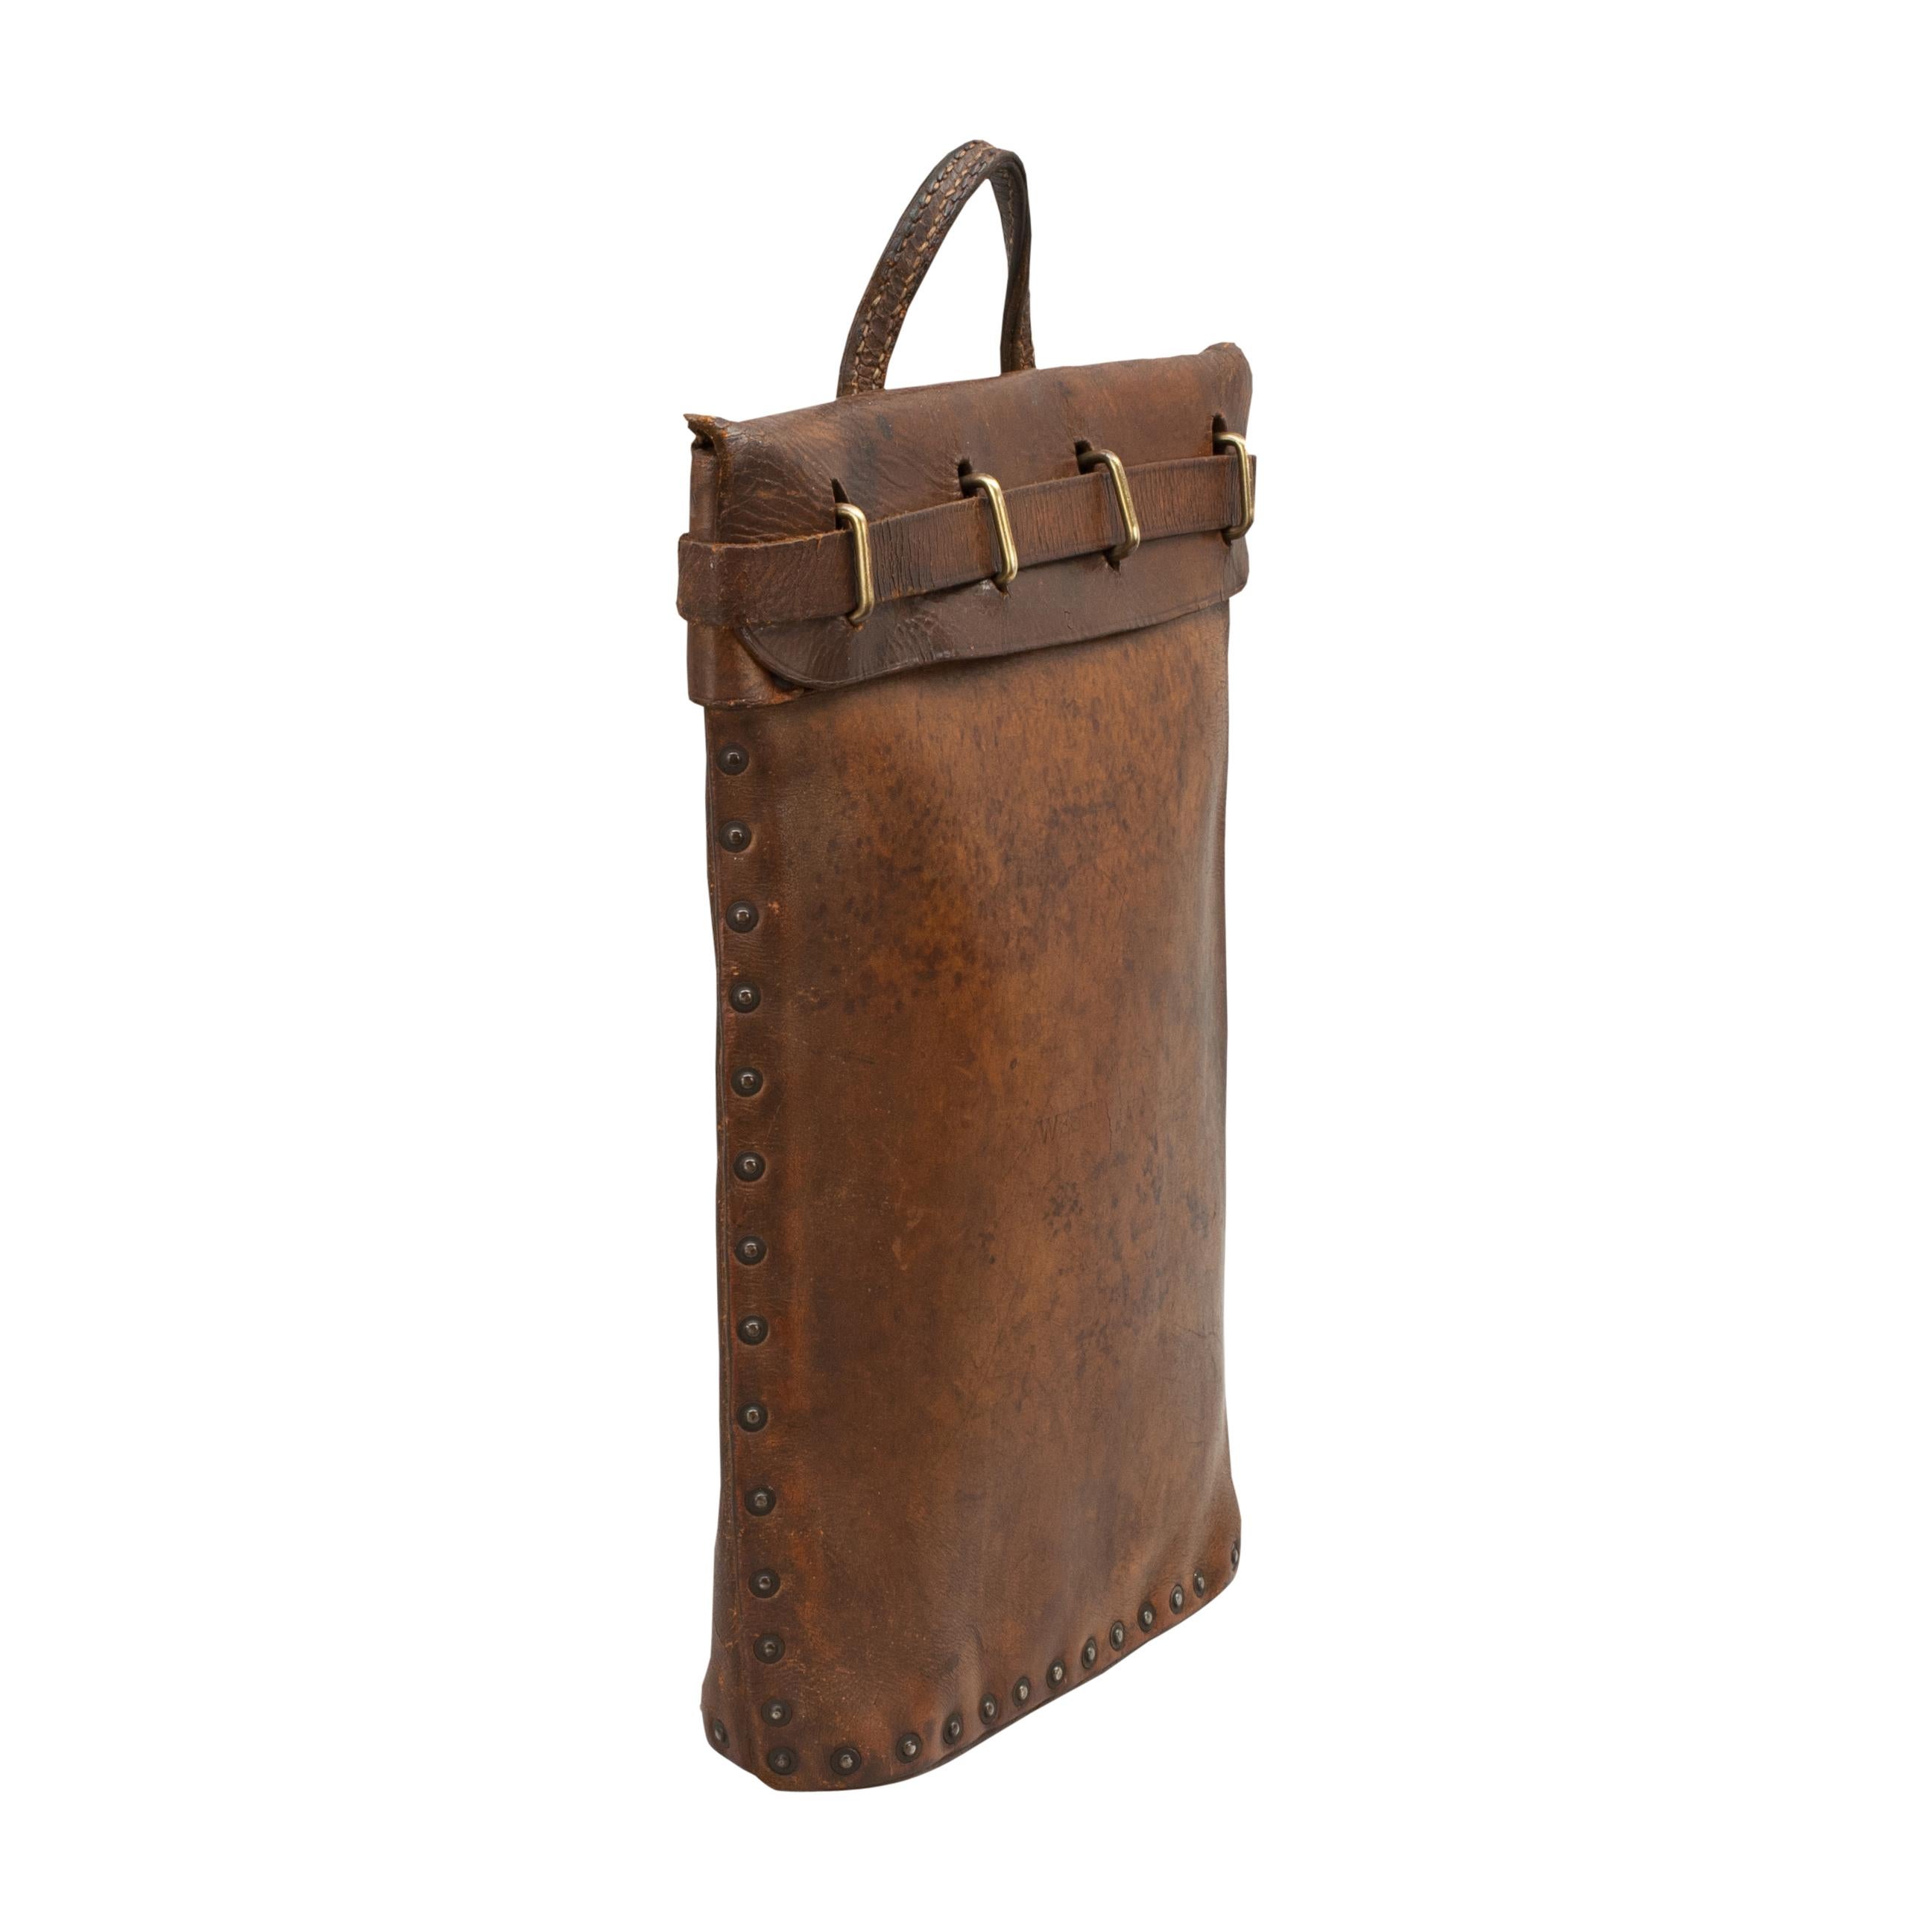 Vintage leather mailbag, briefcase.
A sturdy brown leather bag with one central carry handle and riveted seams. It has a leather belt front closure which feeds through brass metal loops to create a secure closing and is finished with a metal clip